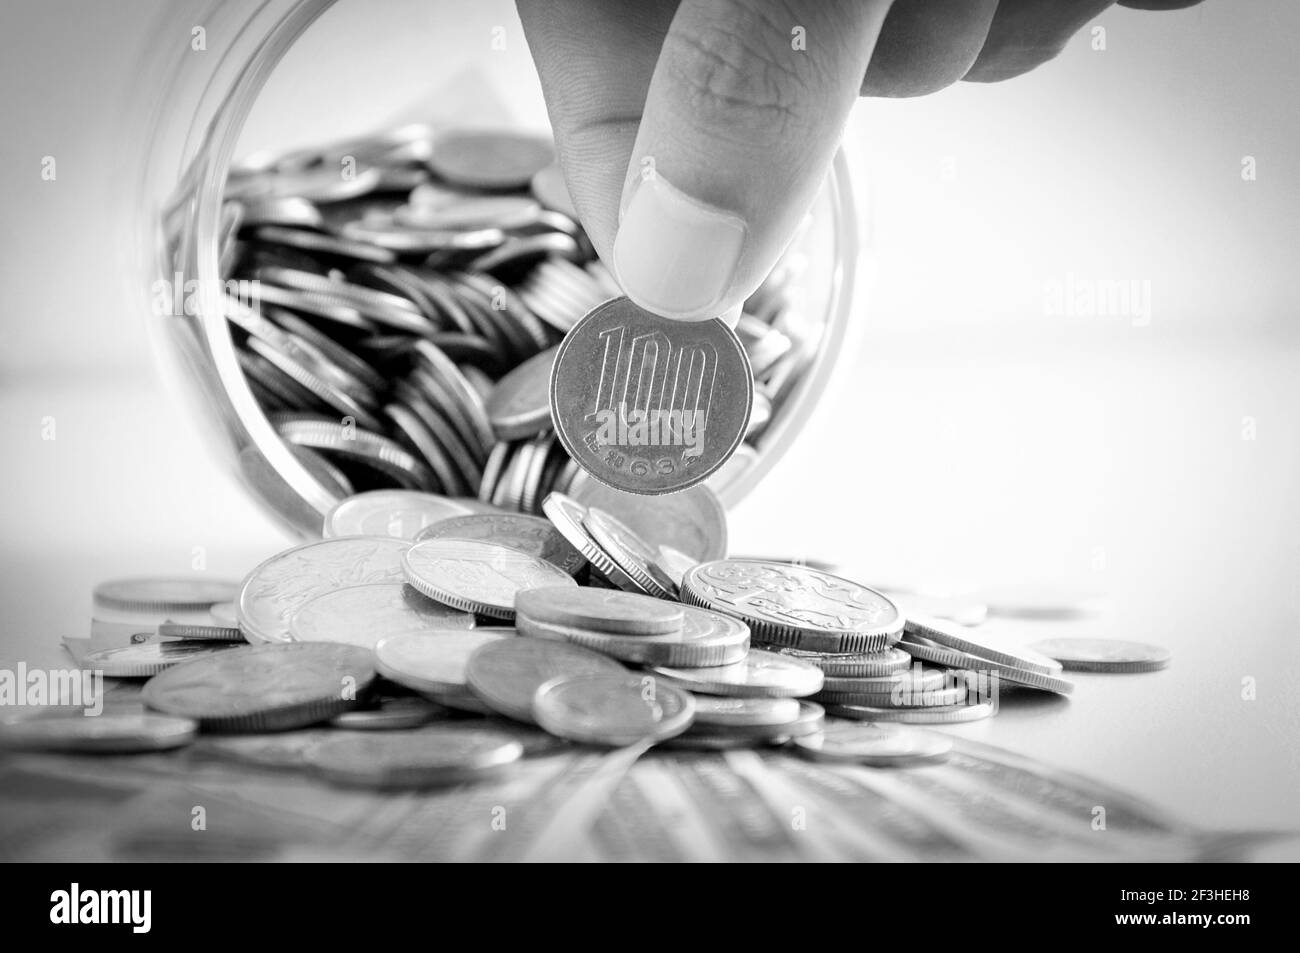 Hand picking up 100 Japanese yen (JPY) coin out of multi currency pile of coins - monochrome effect Stock Photo